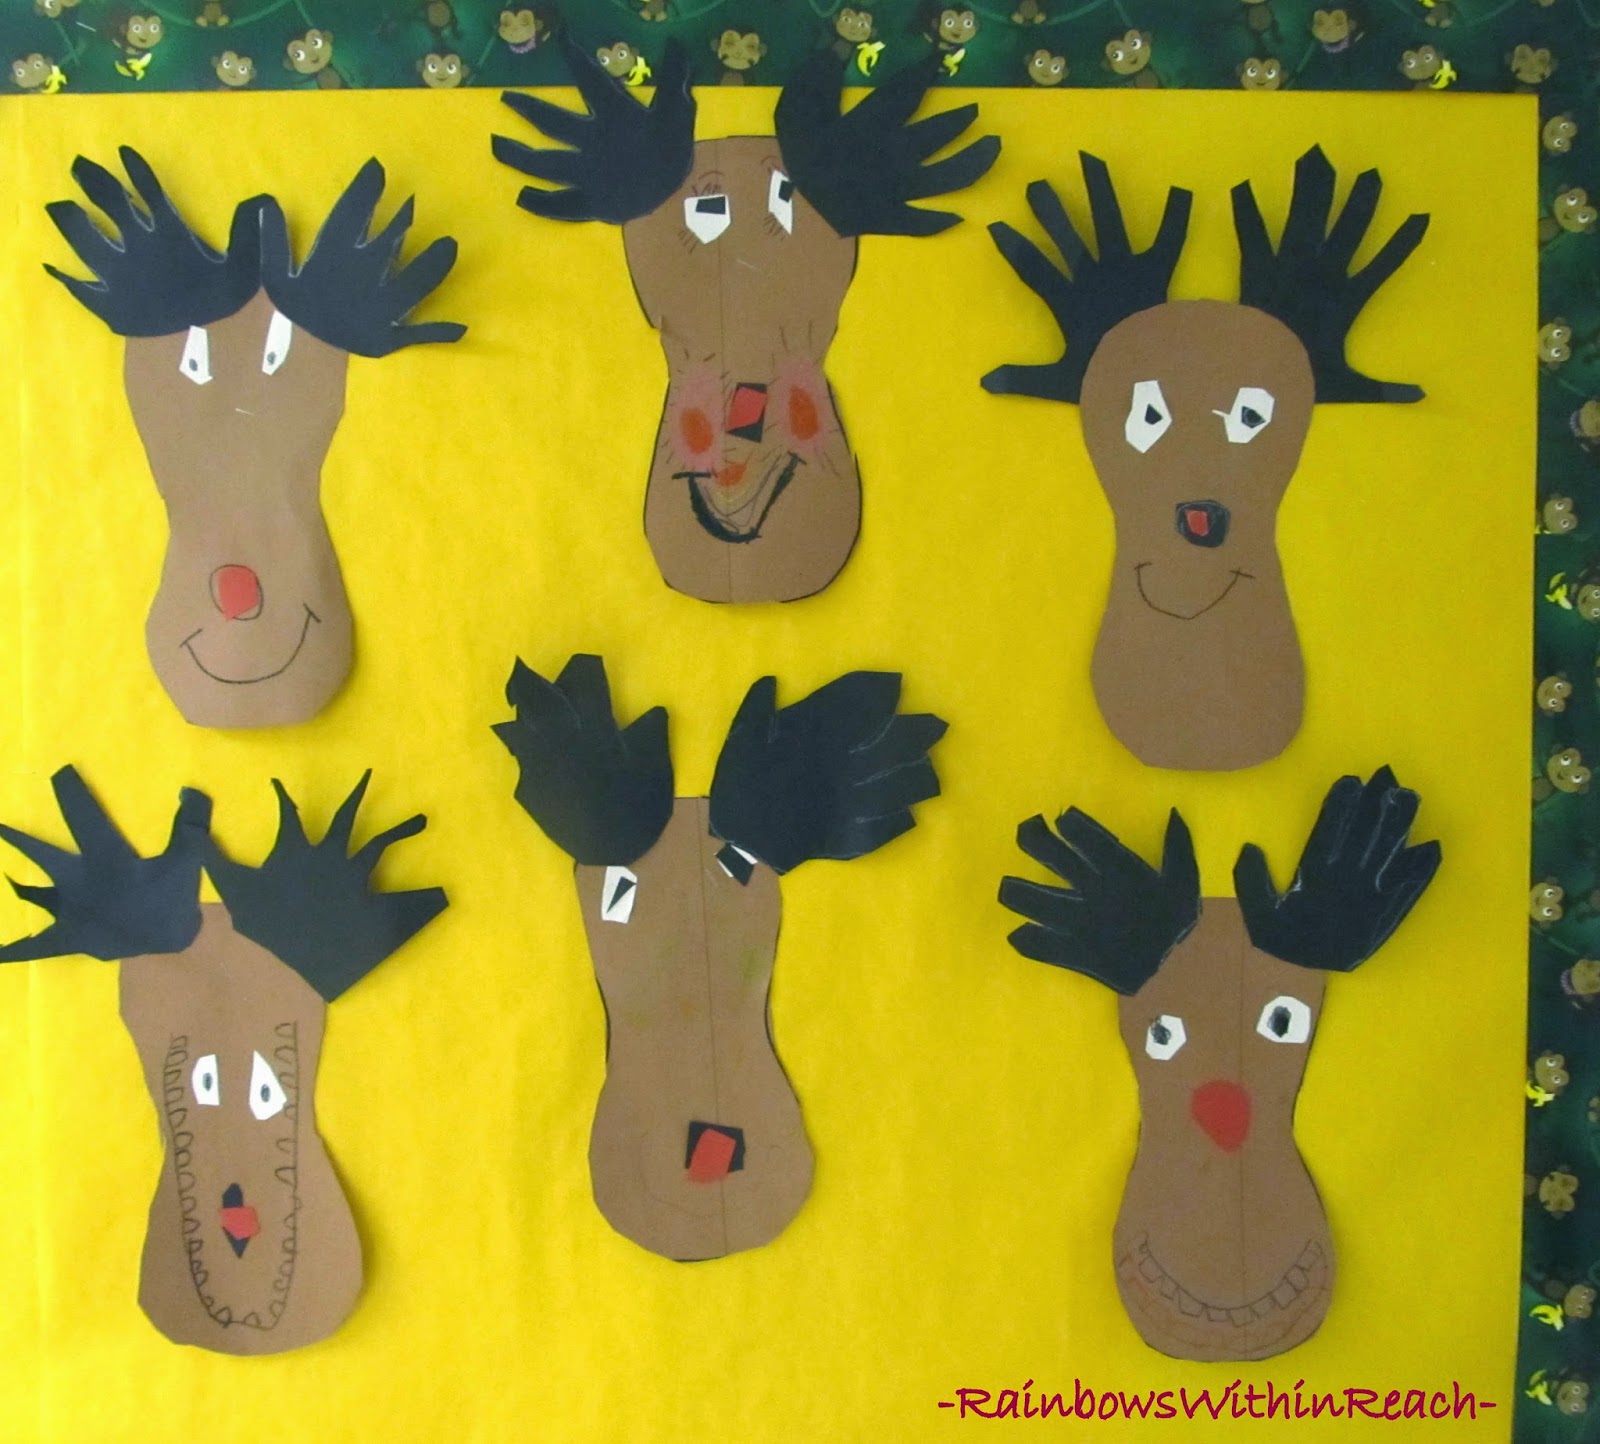 Christmas Bulletin Board: Reindeer with Antlers at RainbowsWithinReach